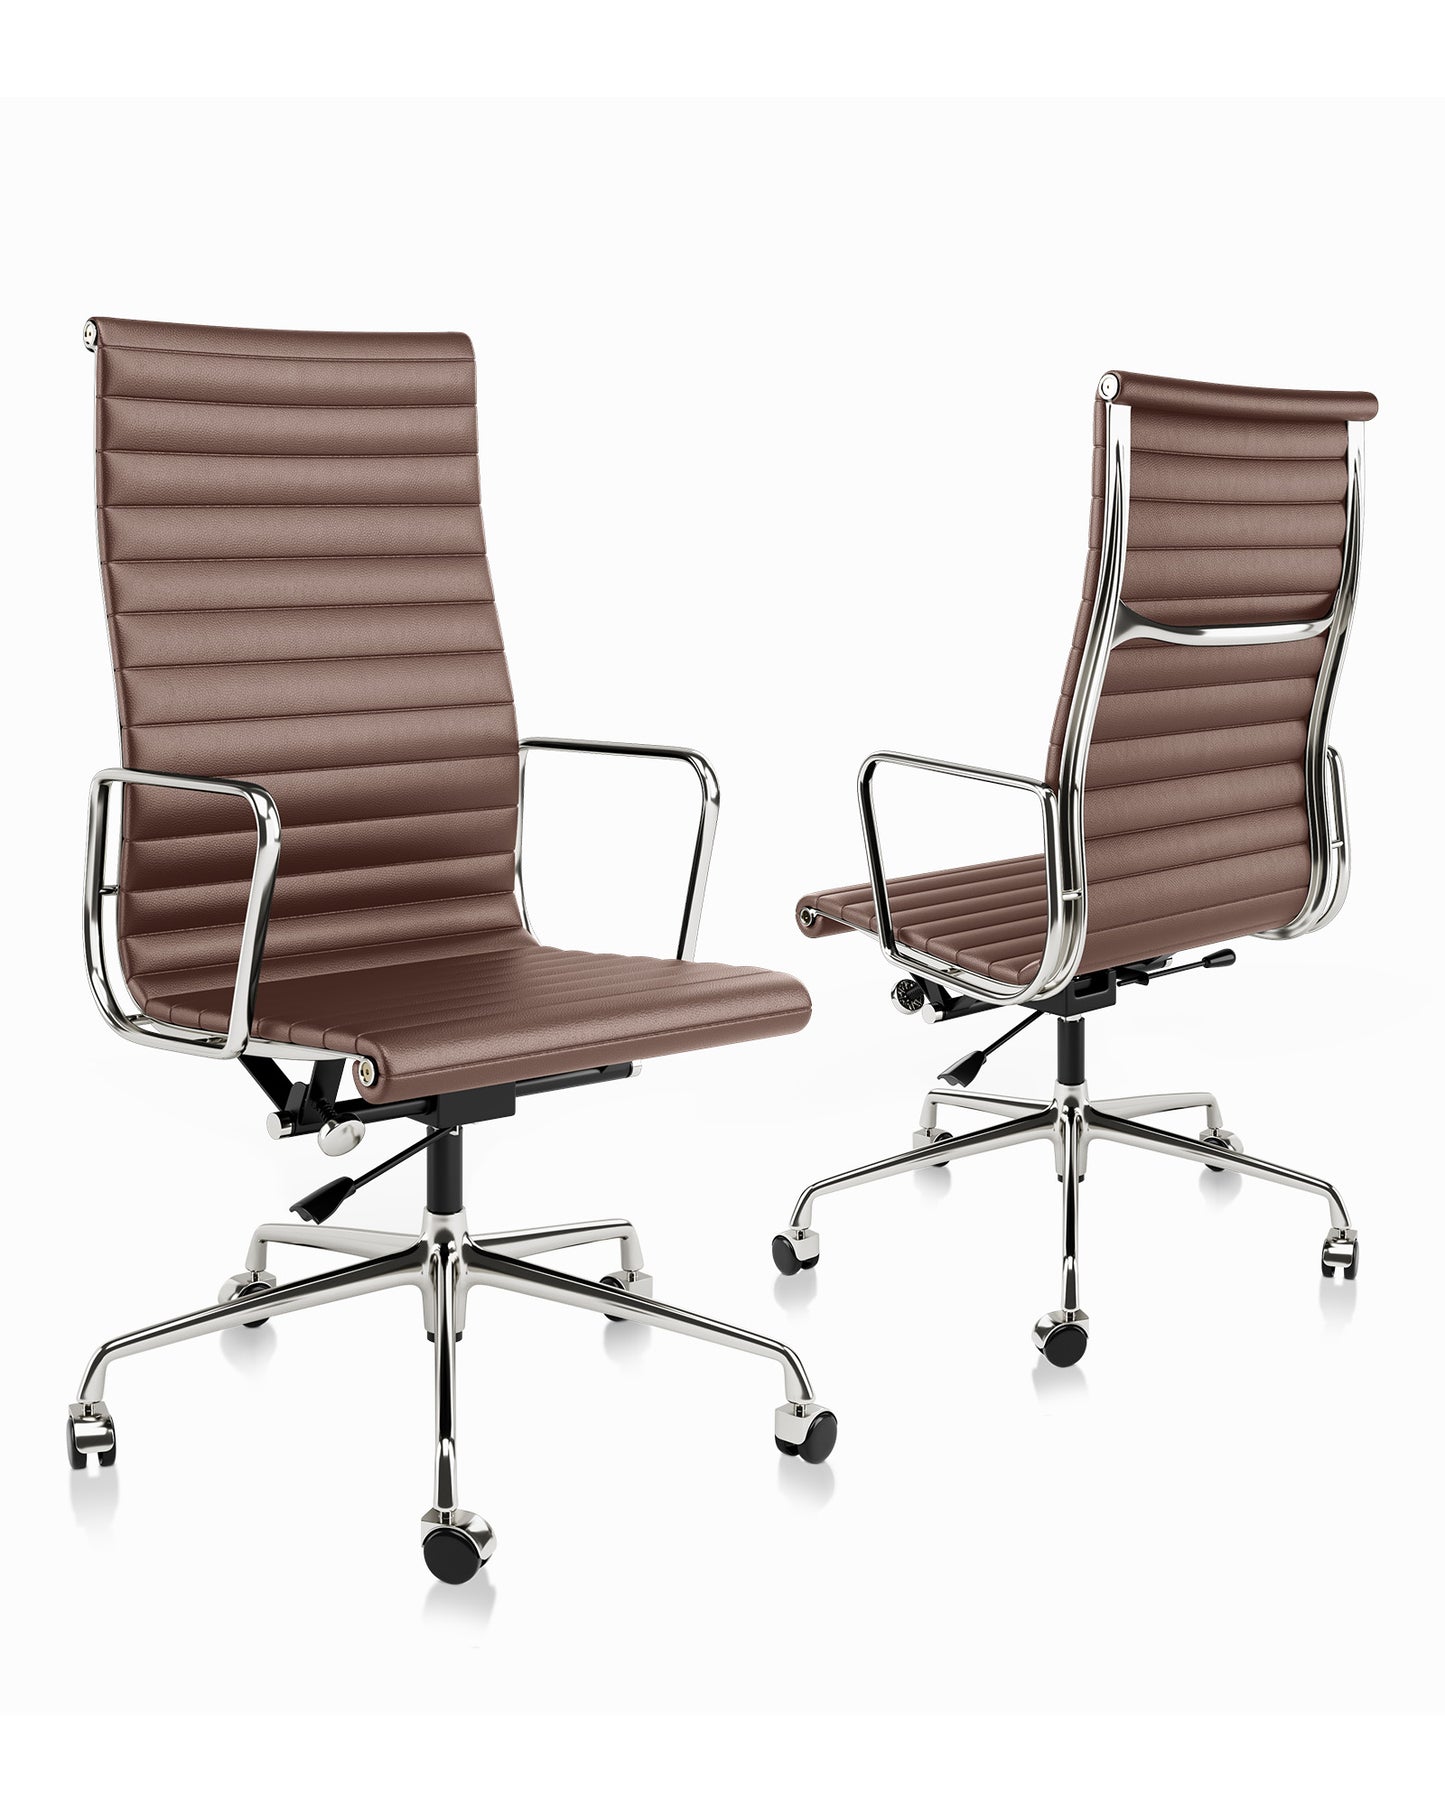 CORX Designs - Eames Aluminum Group Office Chair with Genuine Leather - Review